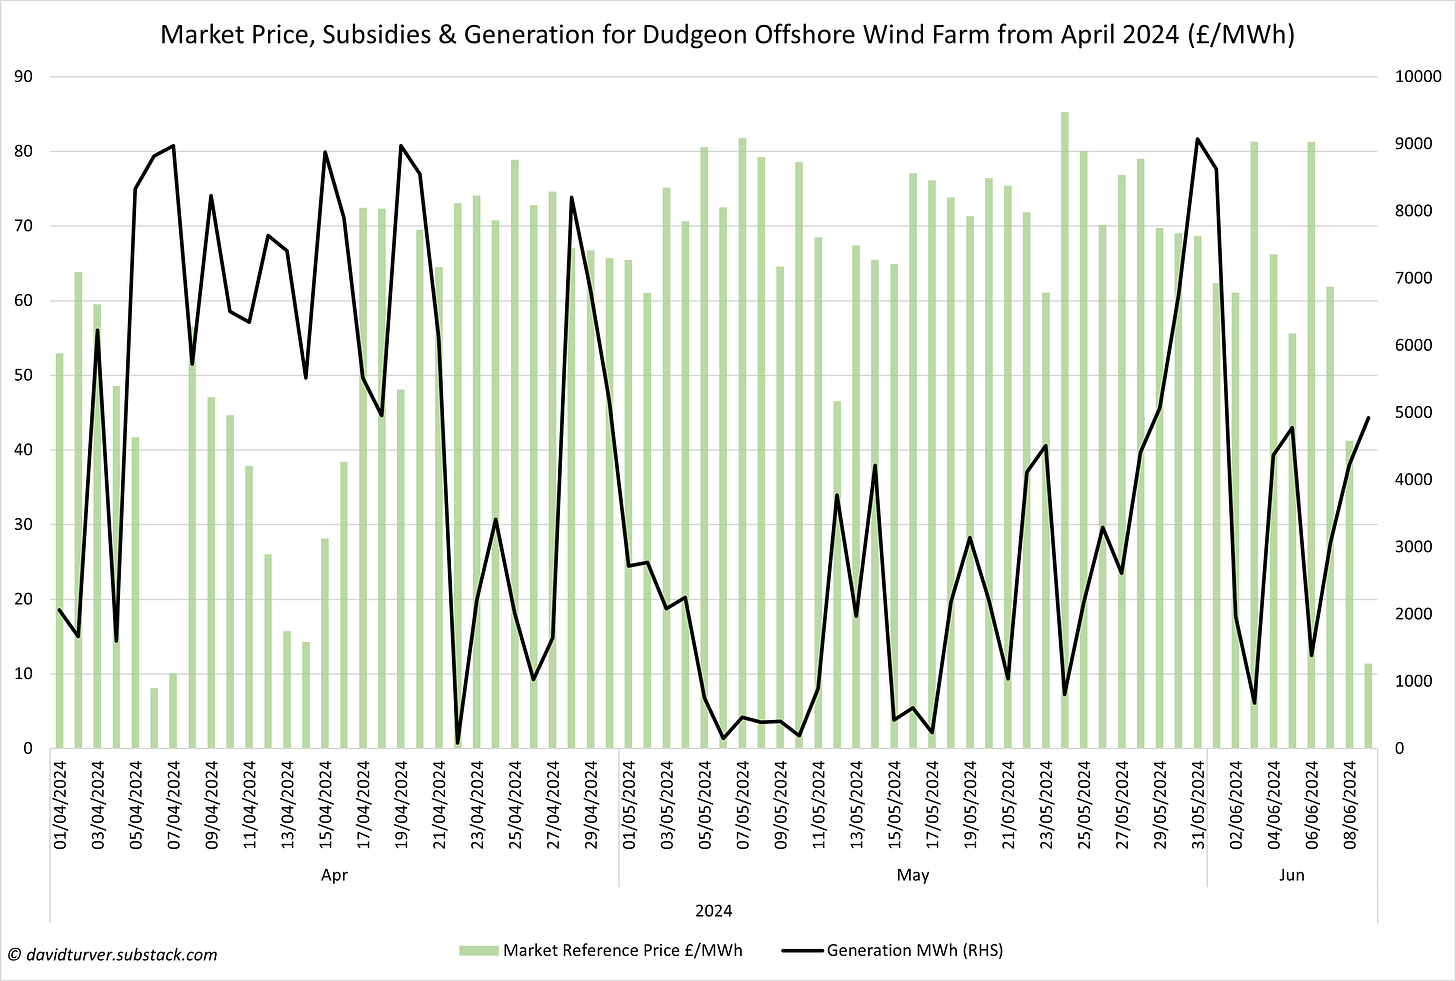 Figure 7 - Reference Price, Subsidy and Generation for Dudgeon Offshore Windfarm April to 9 June 2024 (£ per MWh)